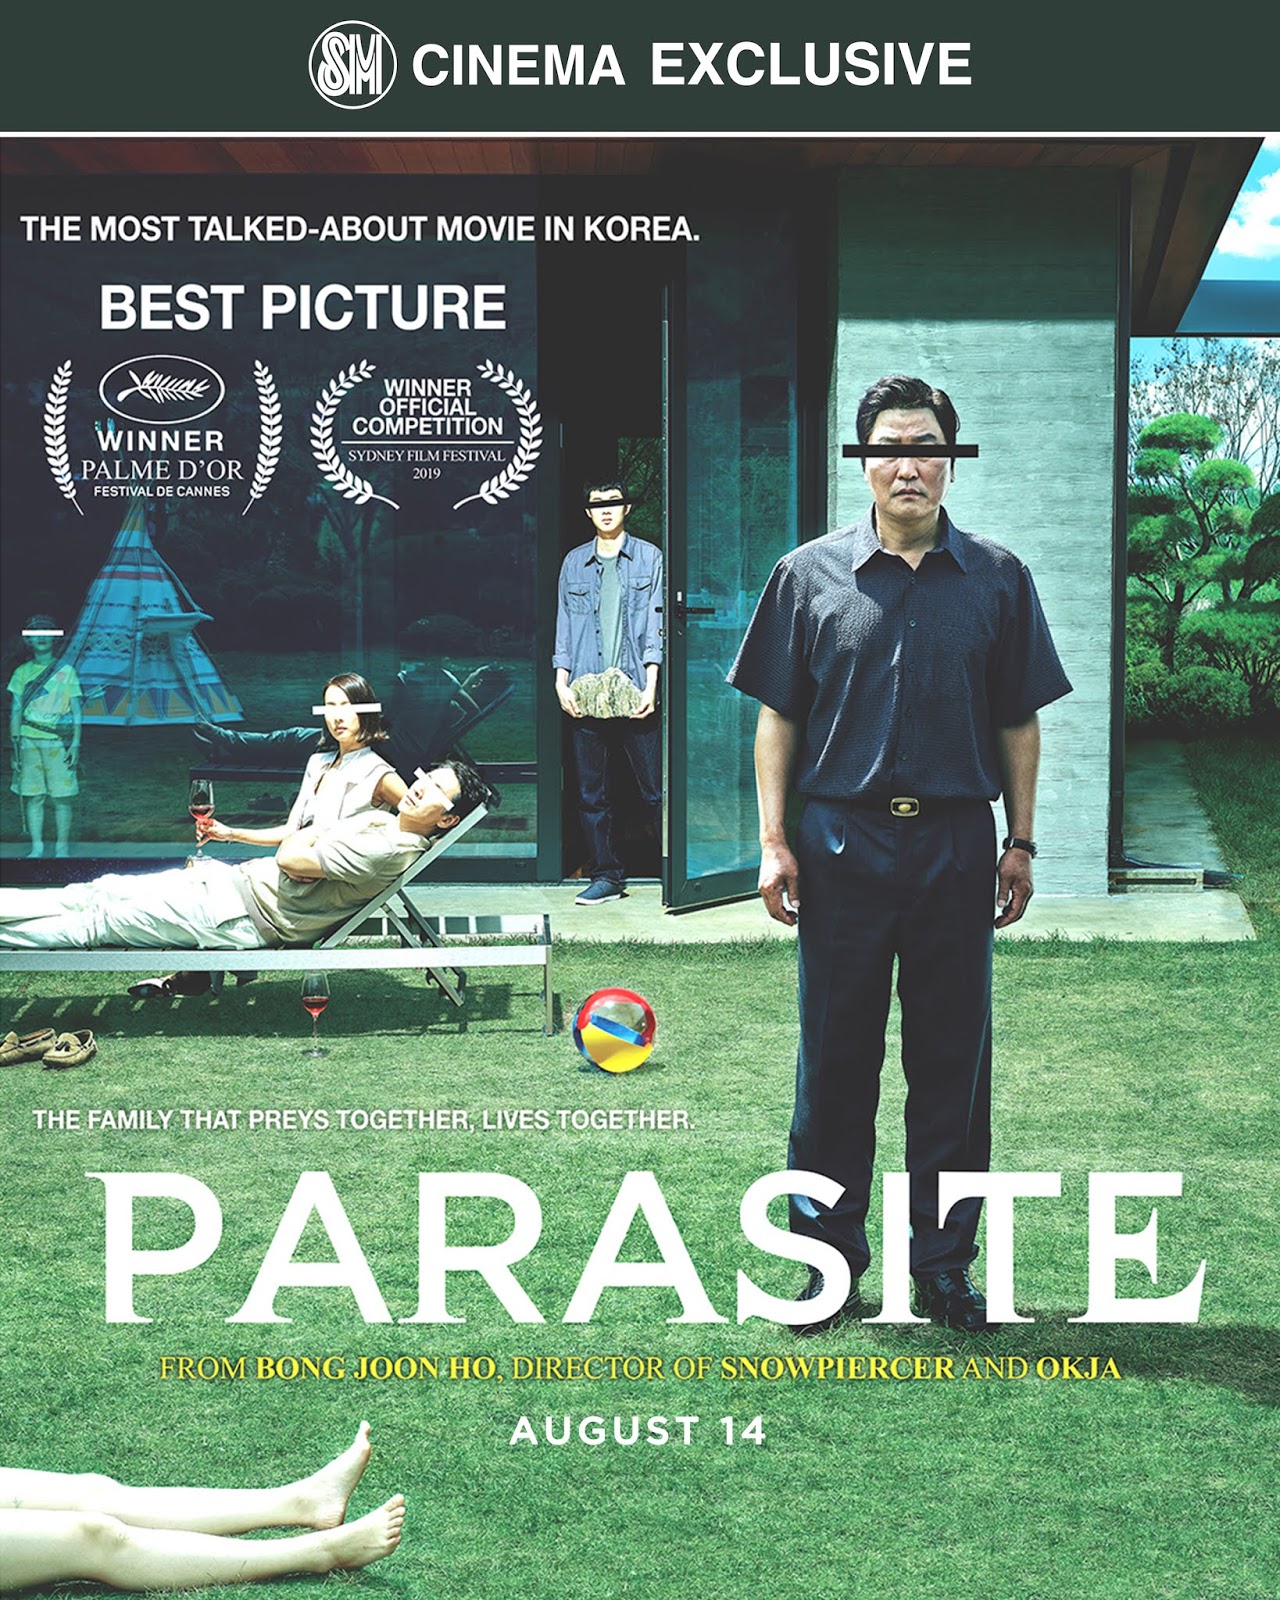 Parasite (2019) - Ruthless Reviews1280 x 1600